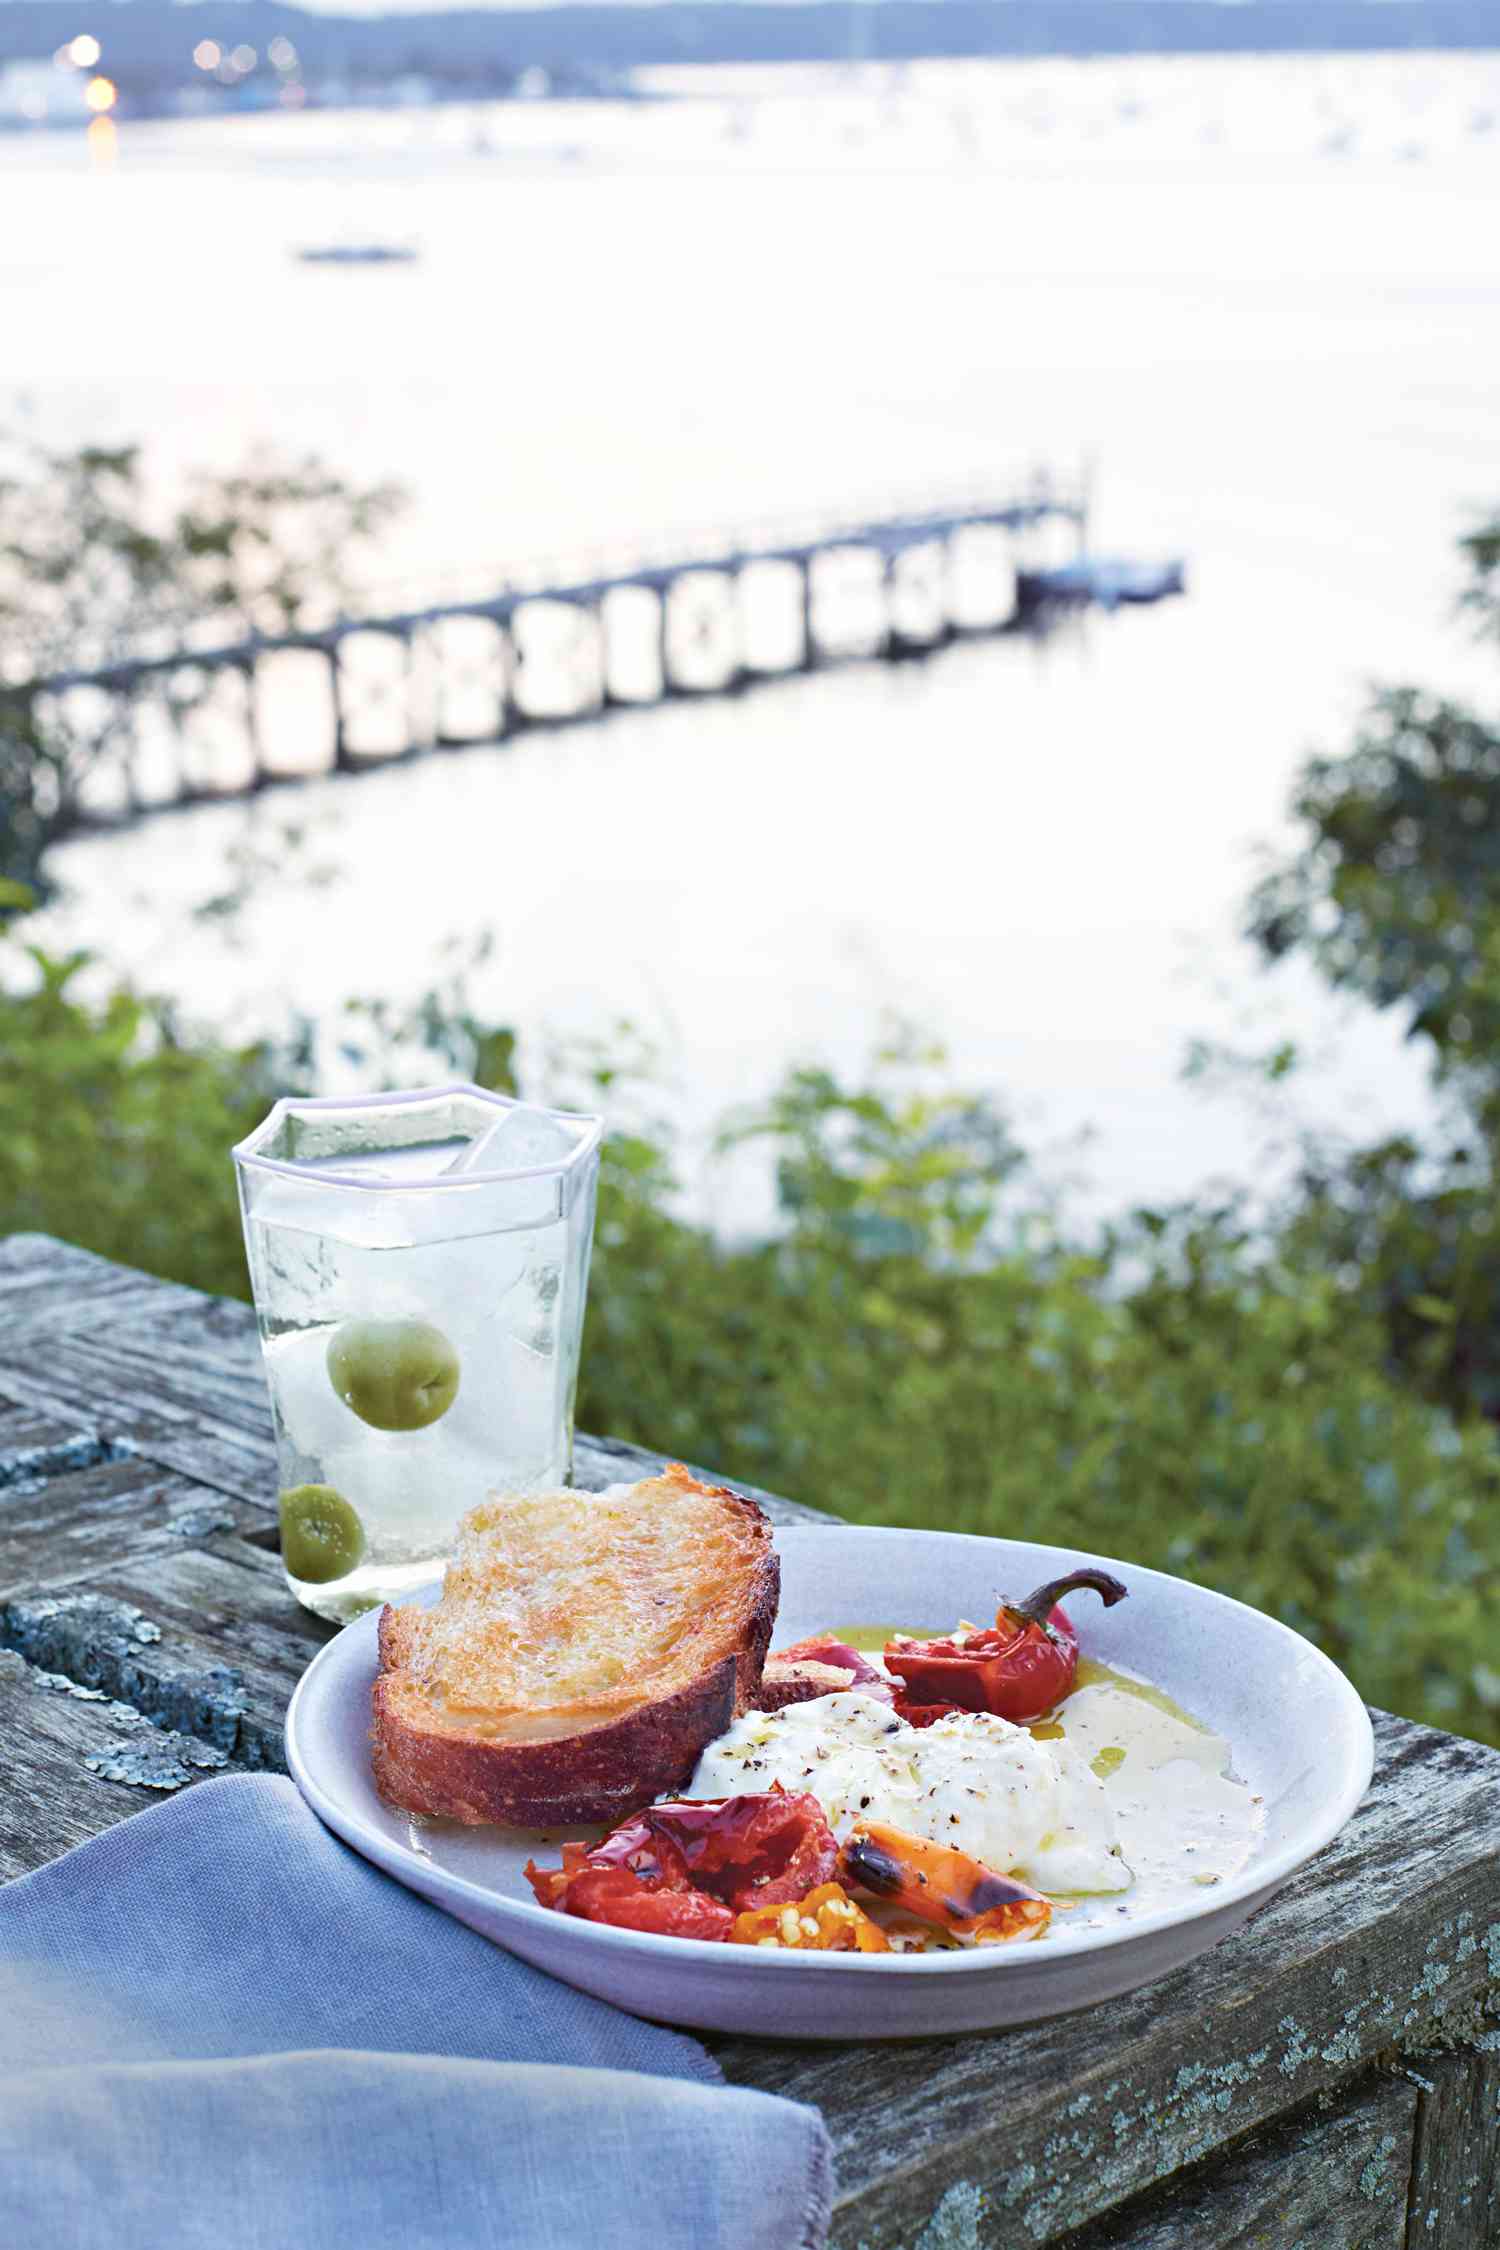 grilled bread and chiles with burrata placed on an outdoor picnic table